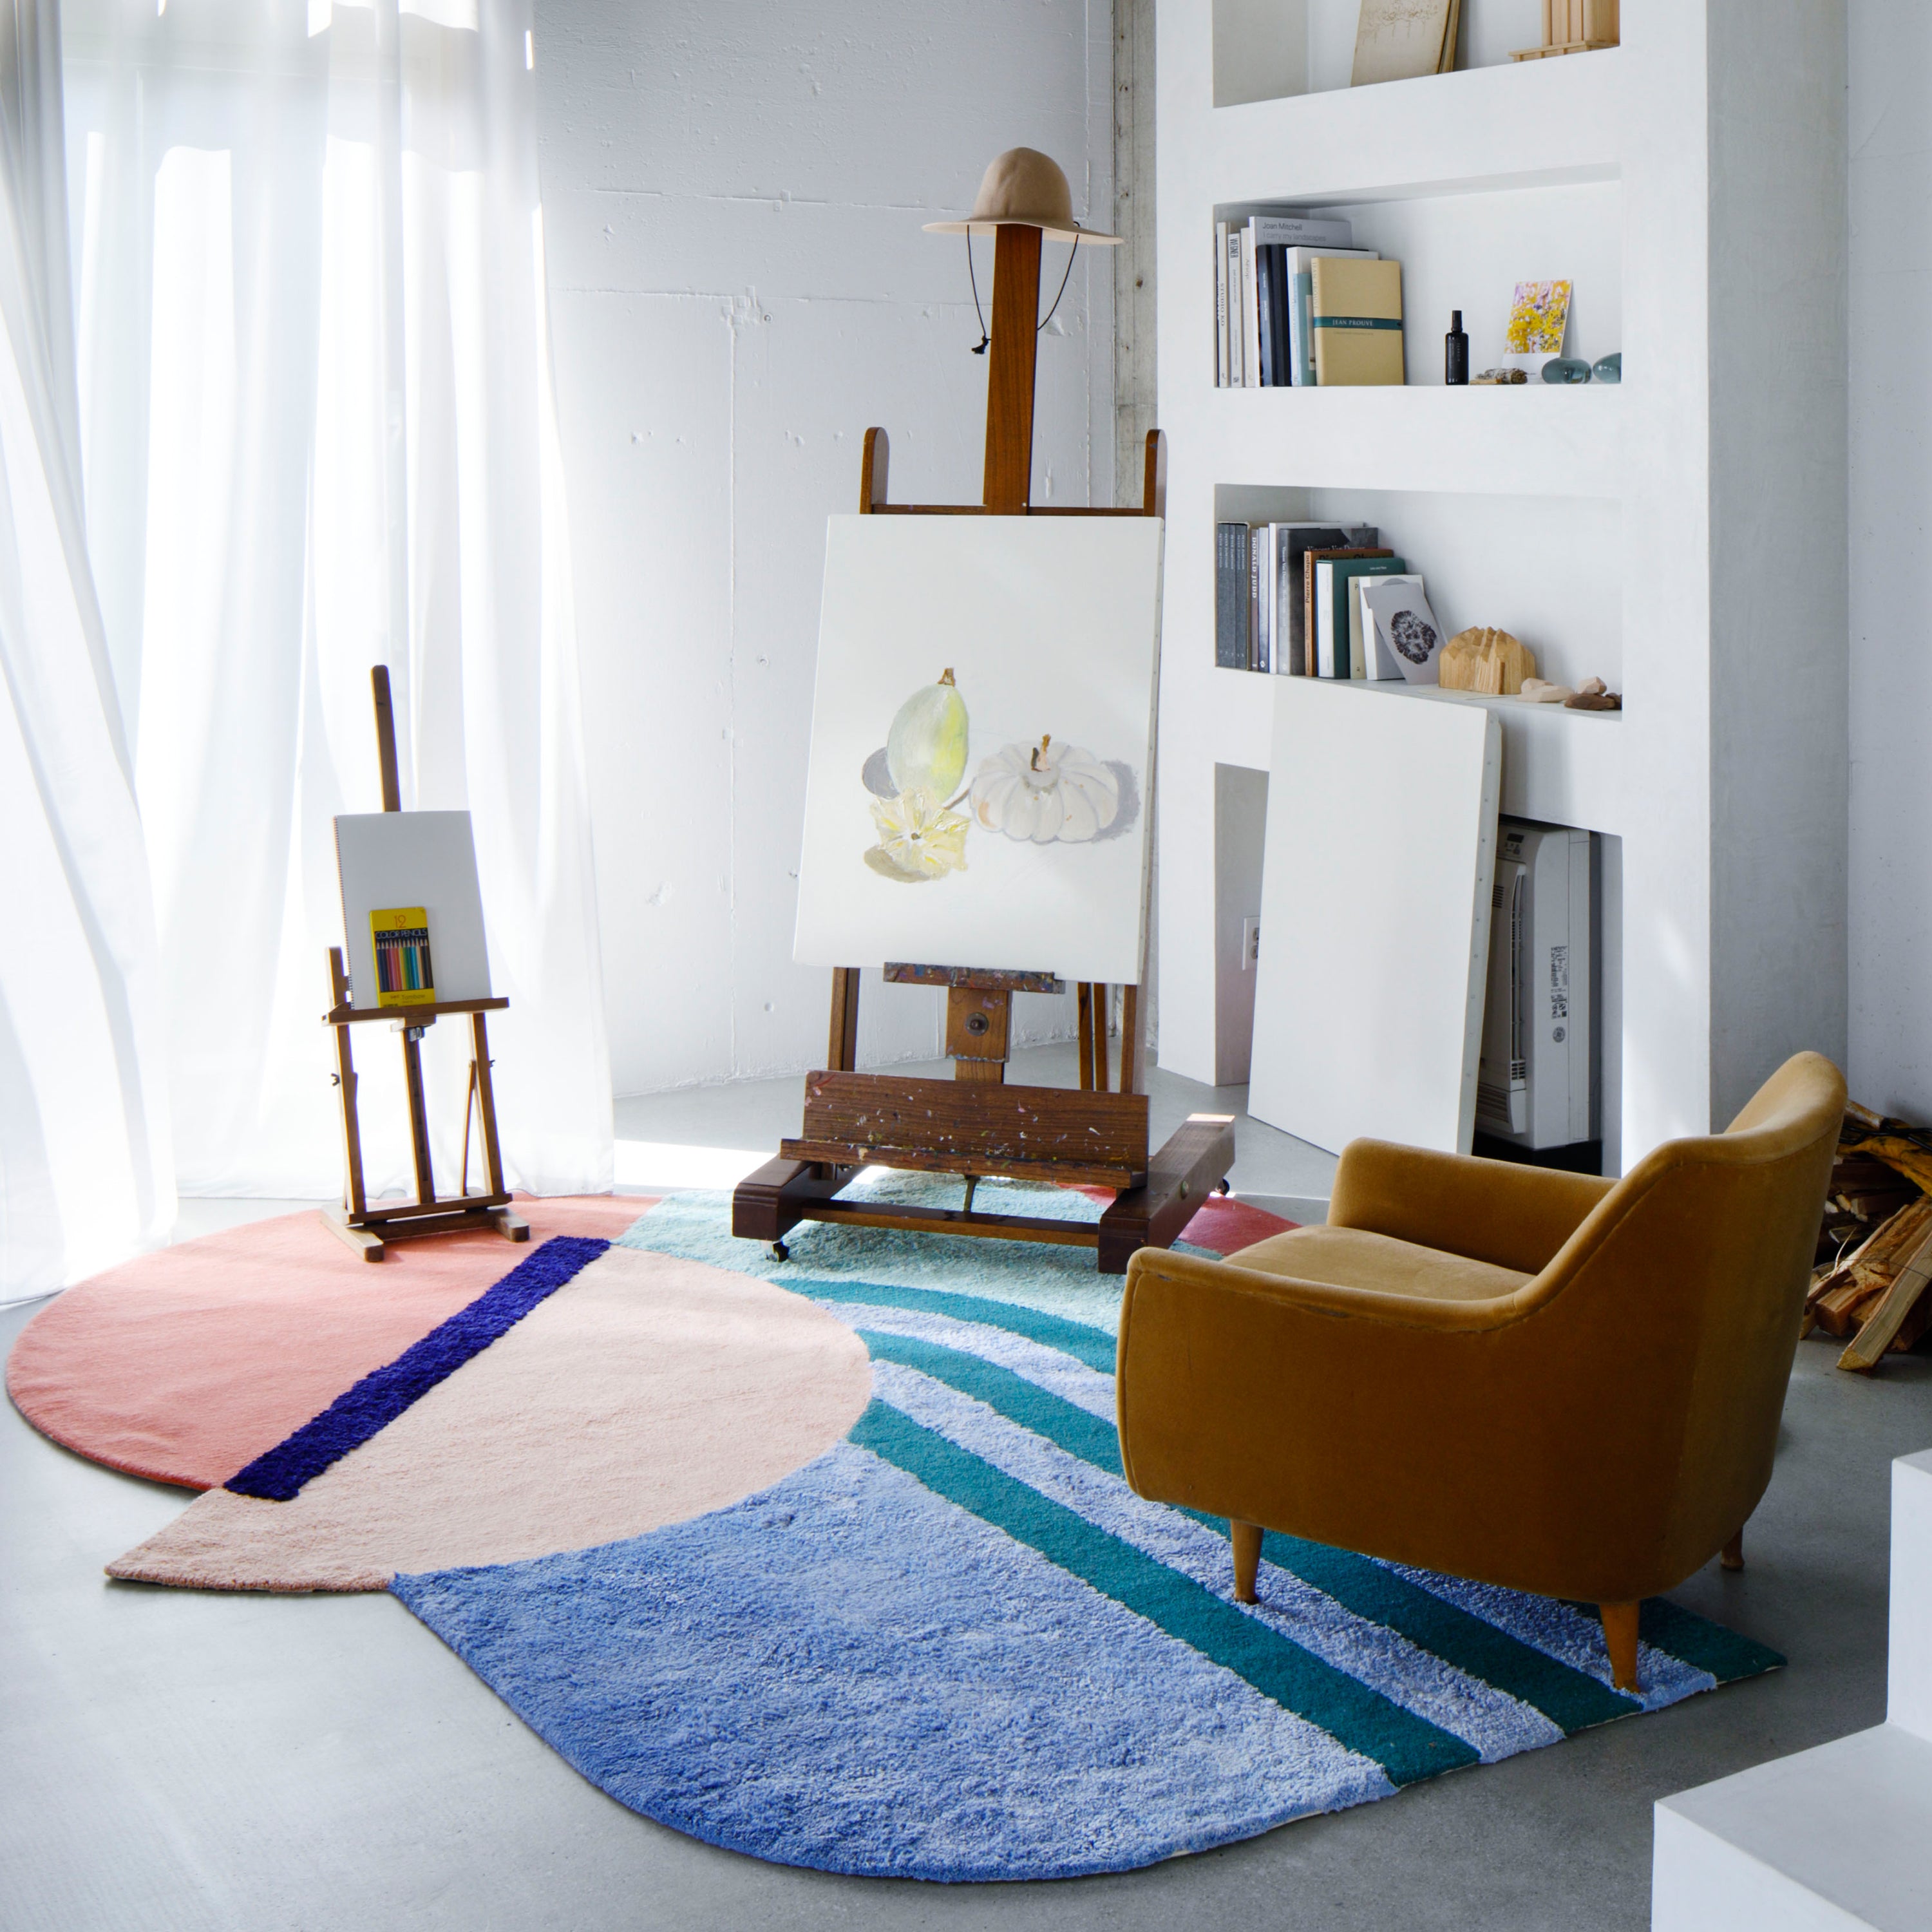 Wavy Gradient Rug - Spatial Placement